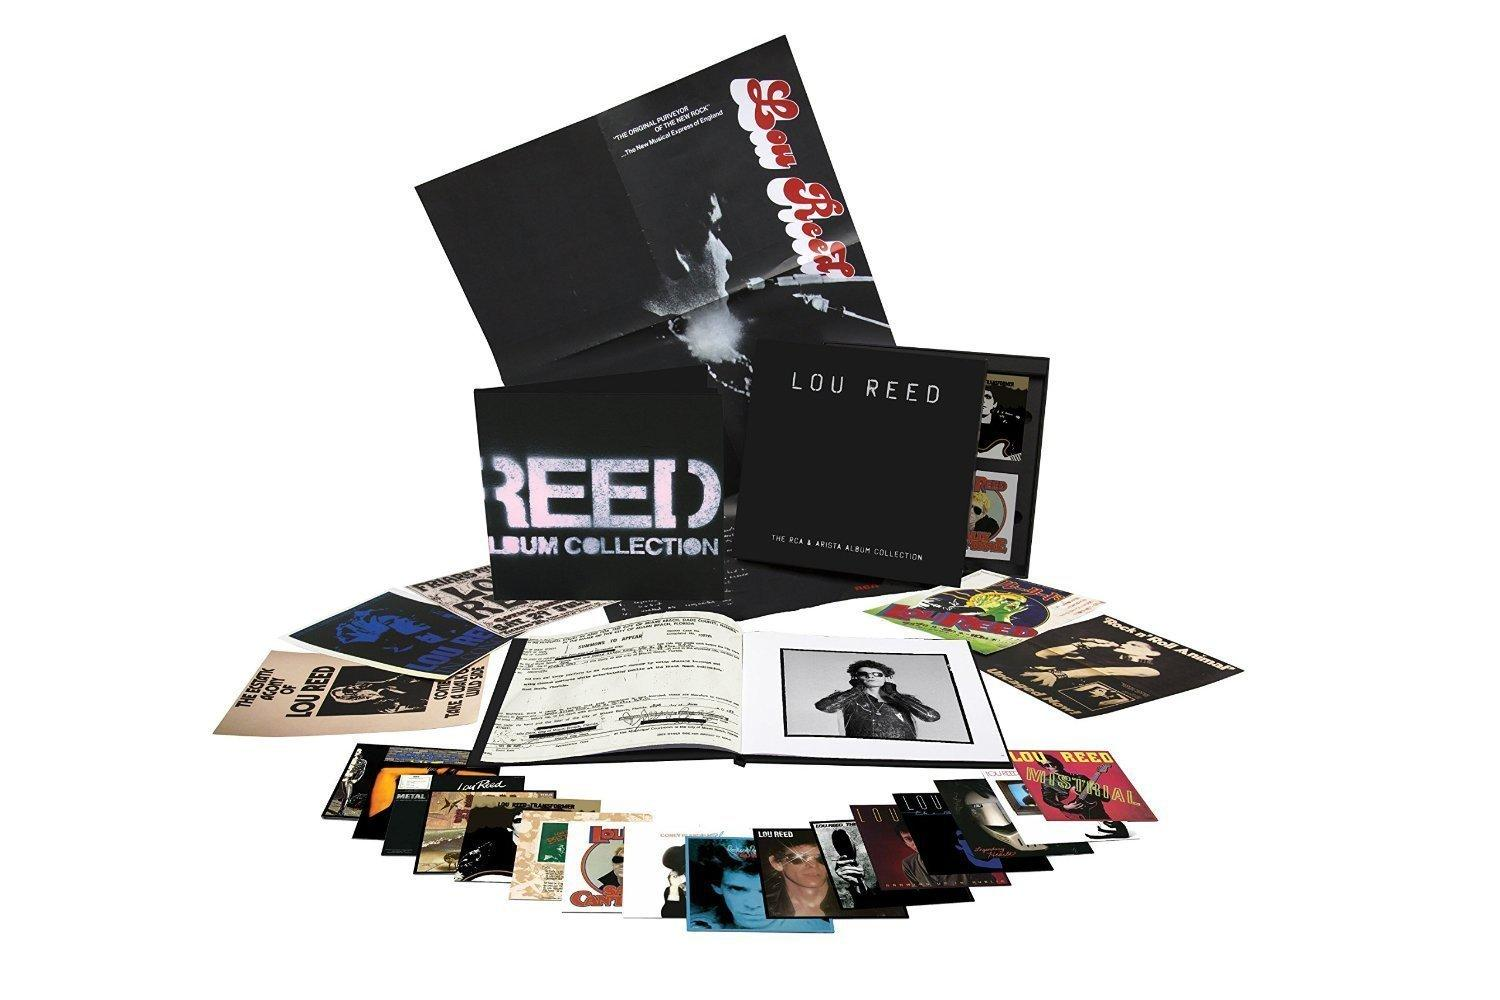 Lou Reed - The Collection RCA Albums (CD) - Arista 